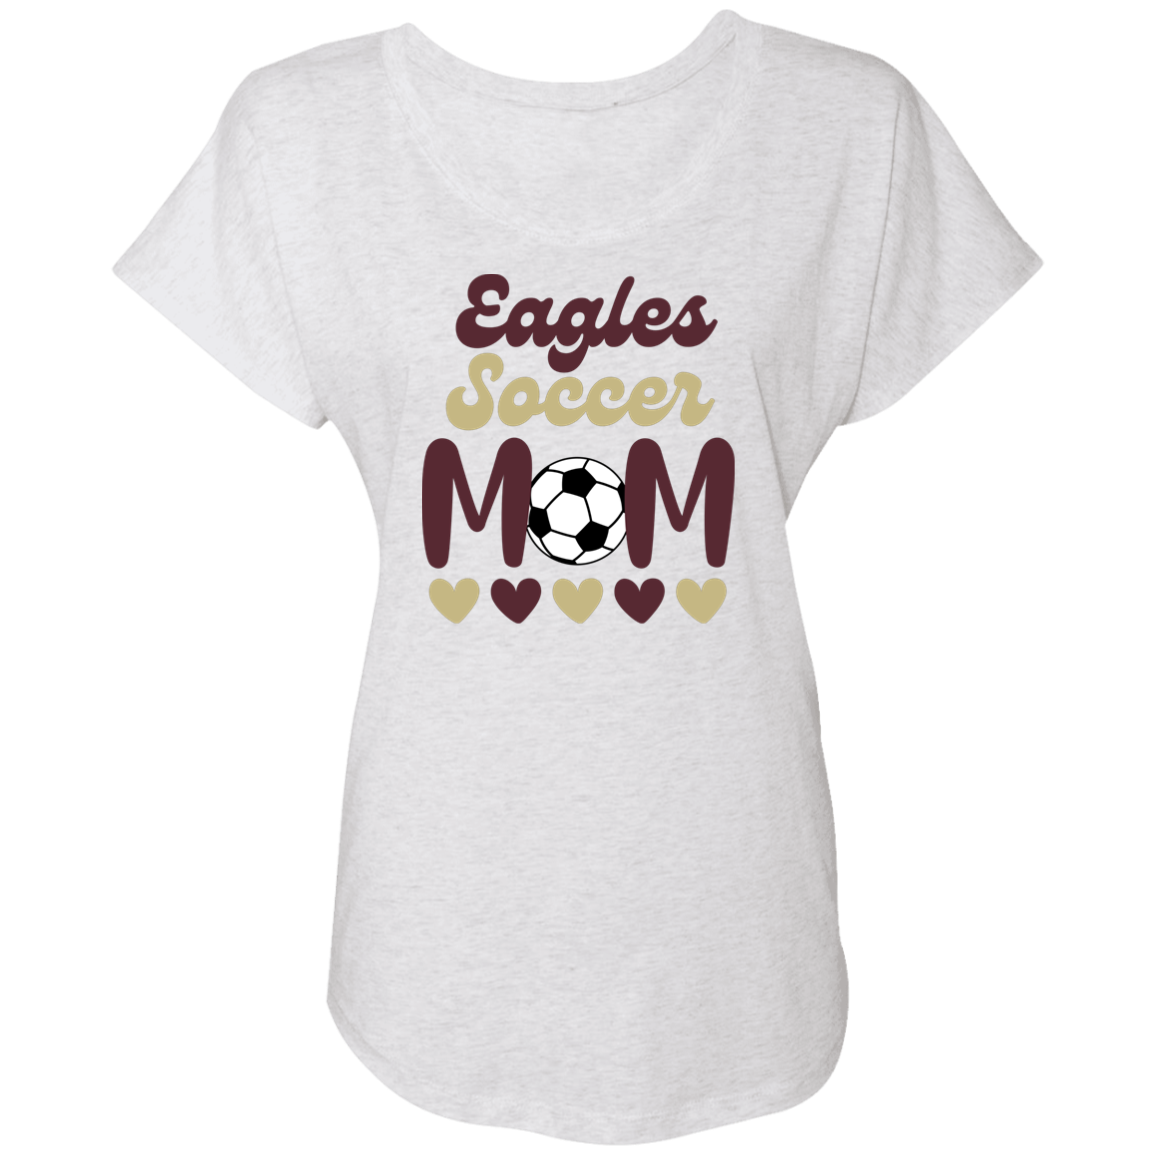 Women's Super Soft Soccer Mom Dolman Graphic Tee - New Albany Eagles